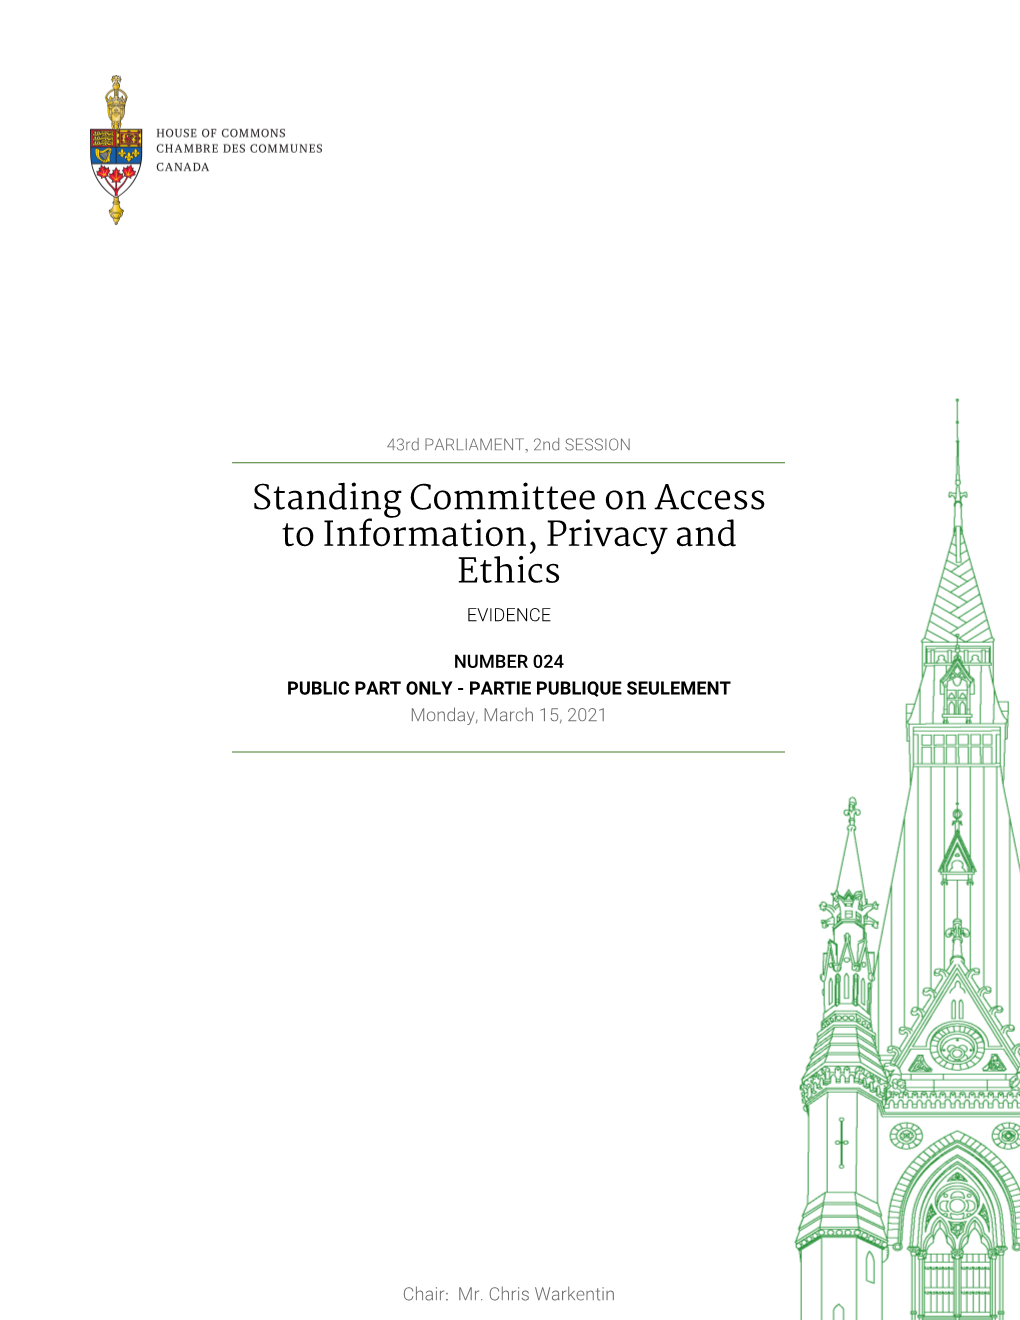 Evidence of the Standing Committee on Access To